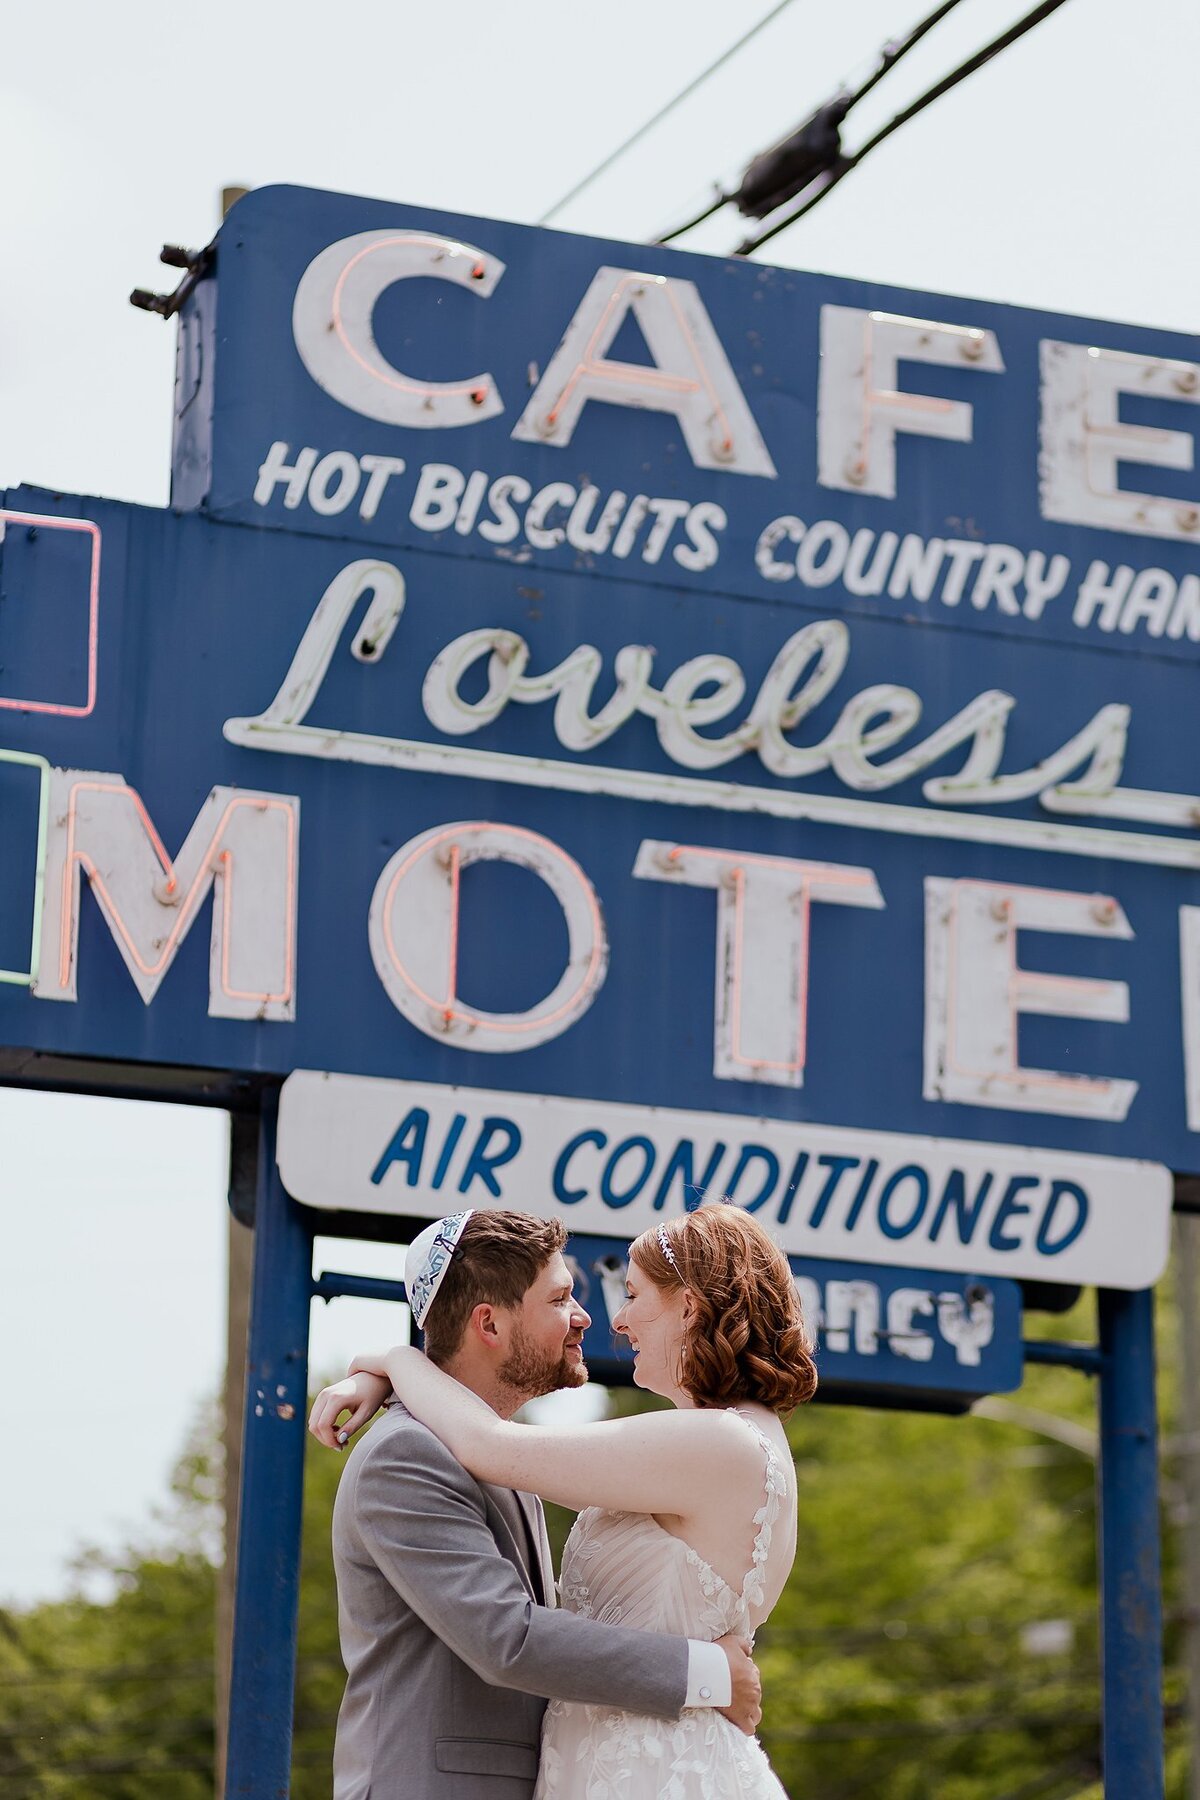 Jewish bride wearing a white v-neck gown with a low back embraces the groom wearing a white and blue yarmulke and a light gray suit in front of the Loveless Motel sign at Loveless Cafe in Nashville at their Jewish wedding